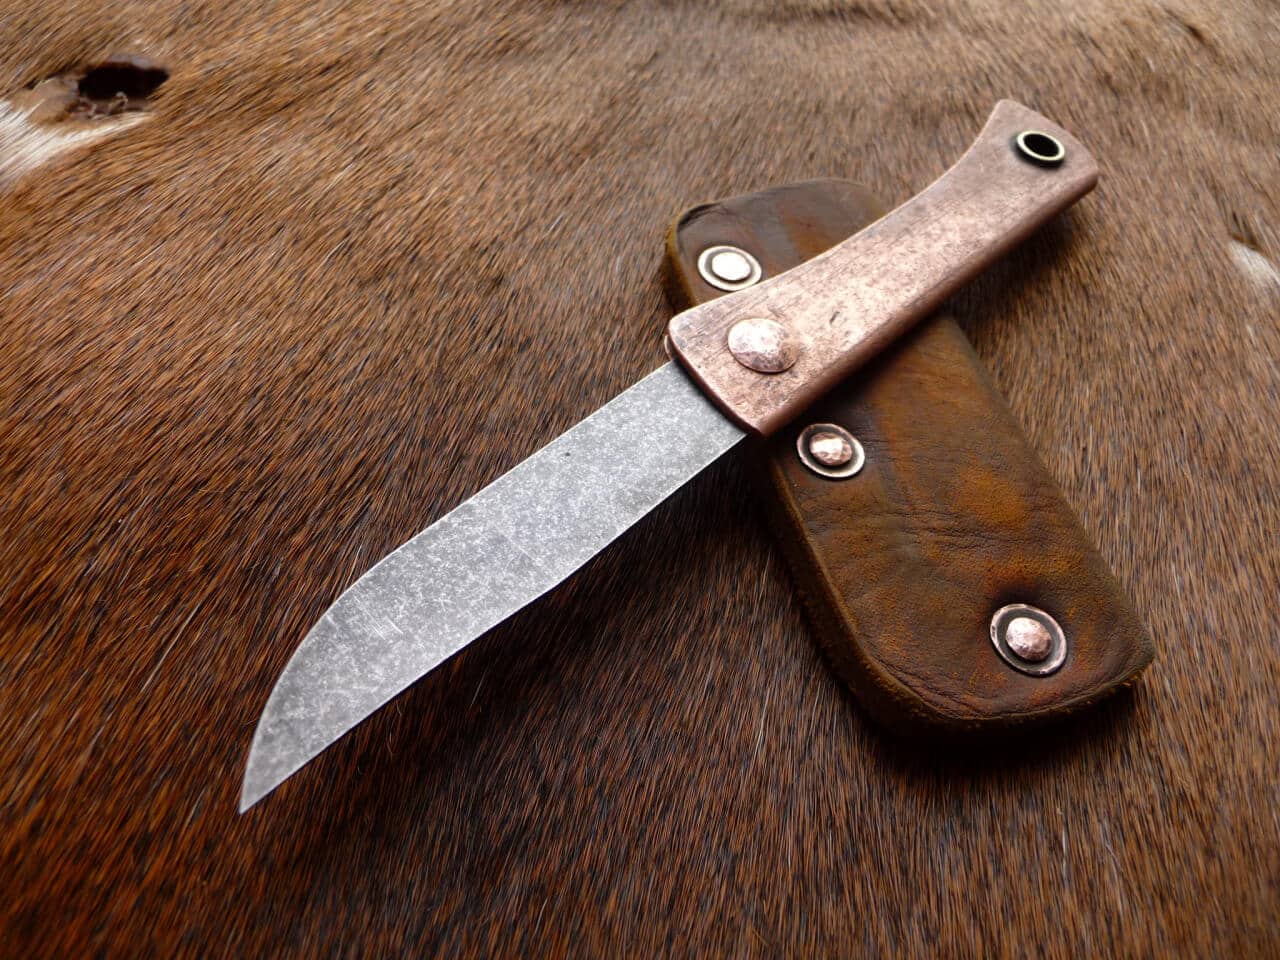 Antiqued Copper Opinel knife mod - back view (Photo Ru Titley Knives)